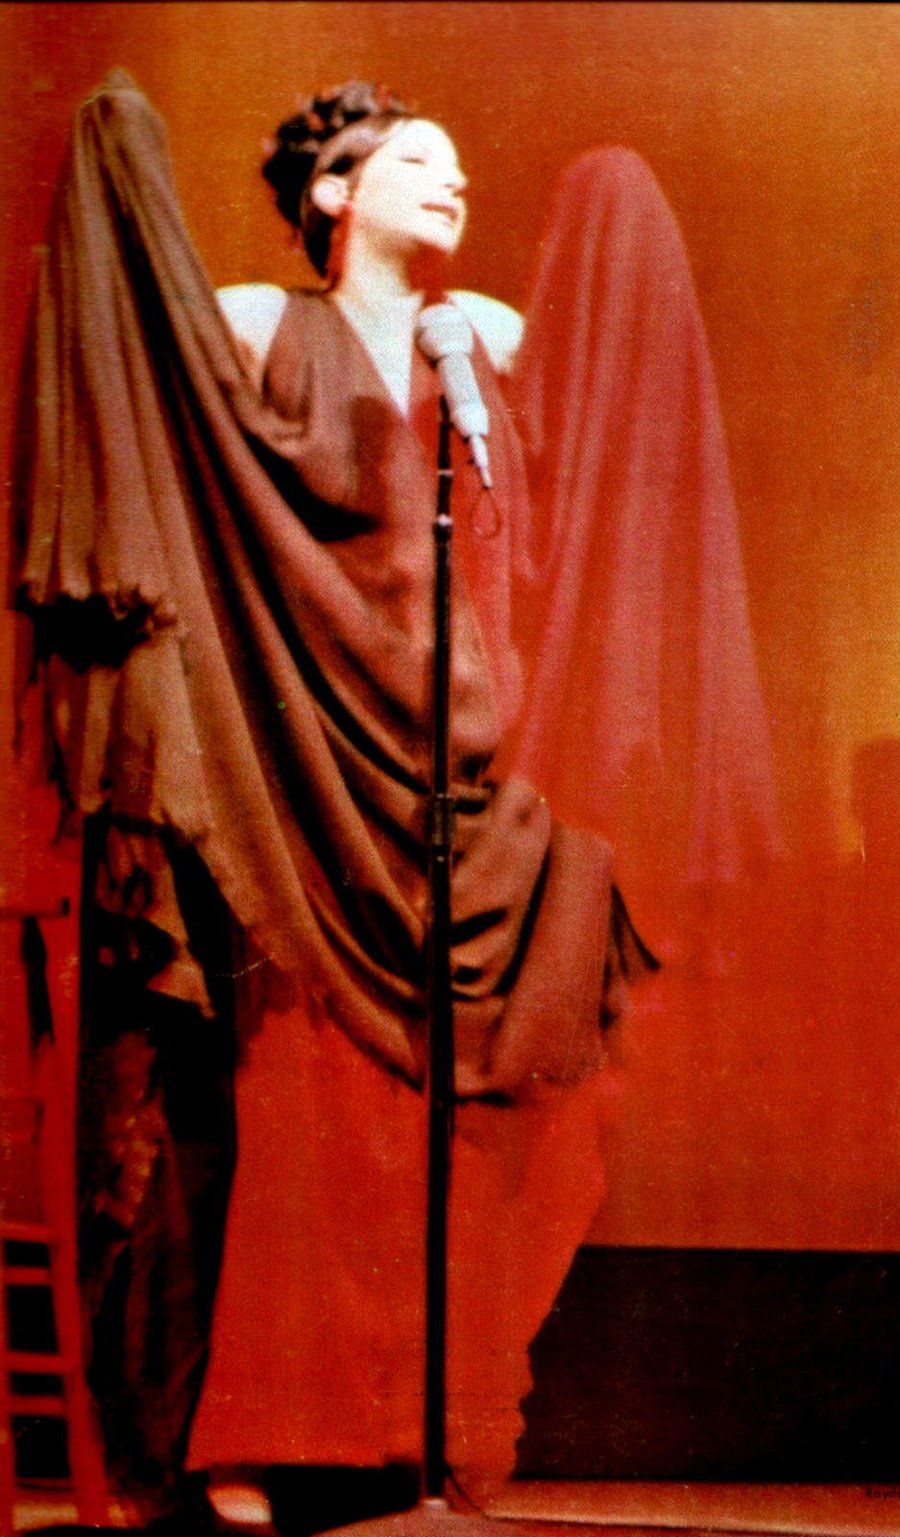 Streisand at microphone in layered chiffon gown